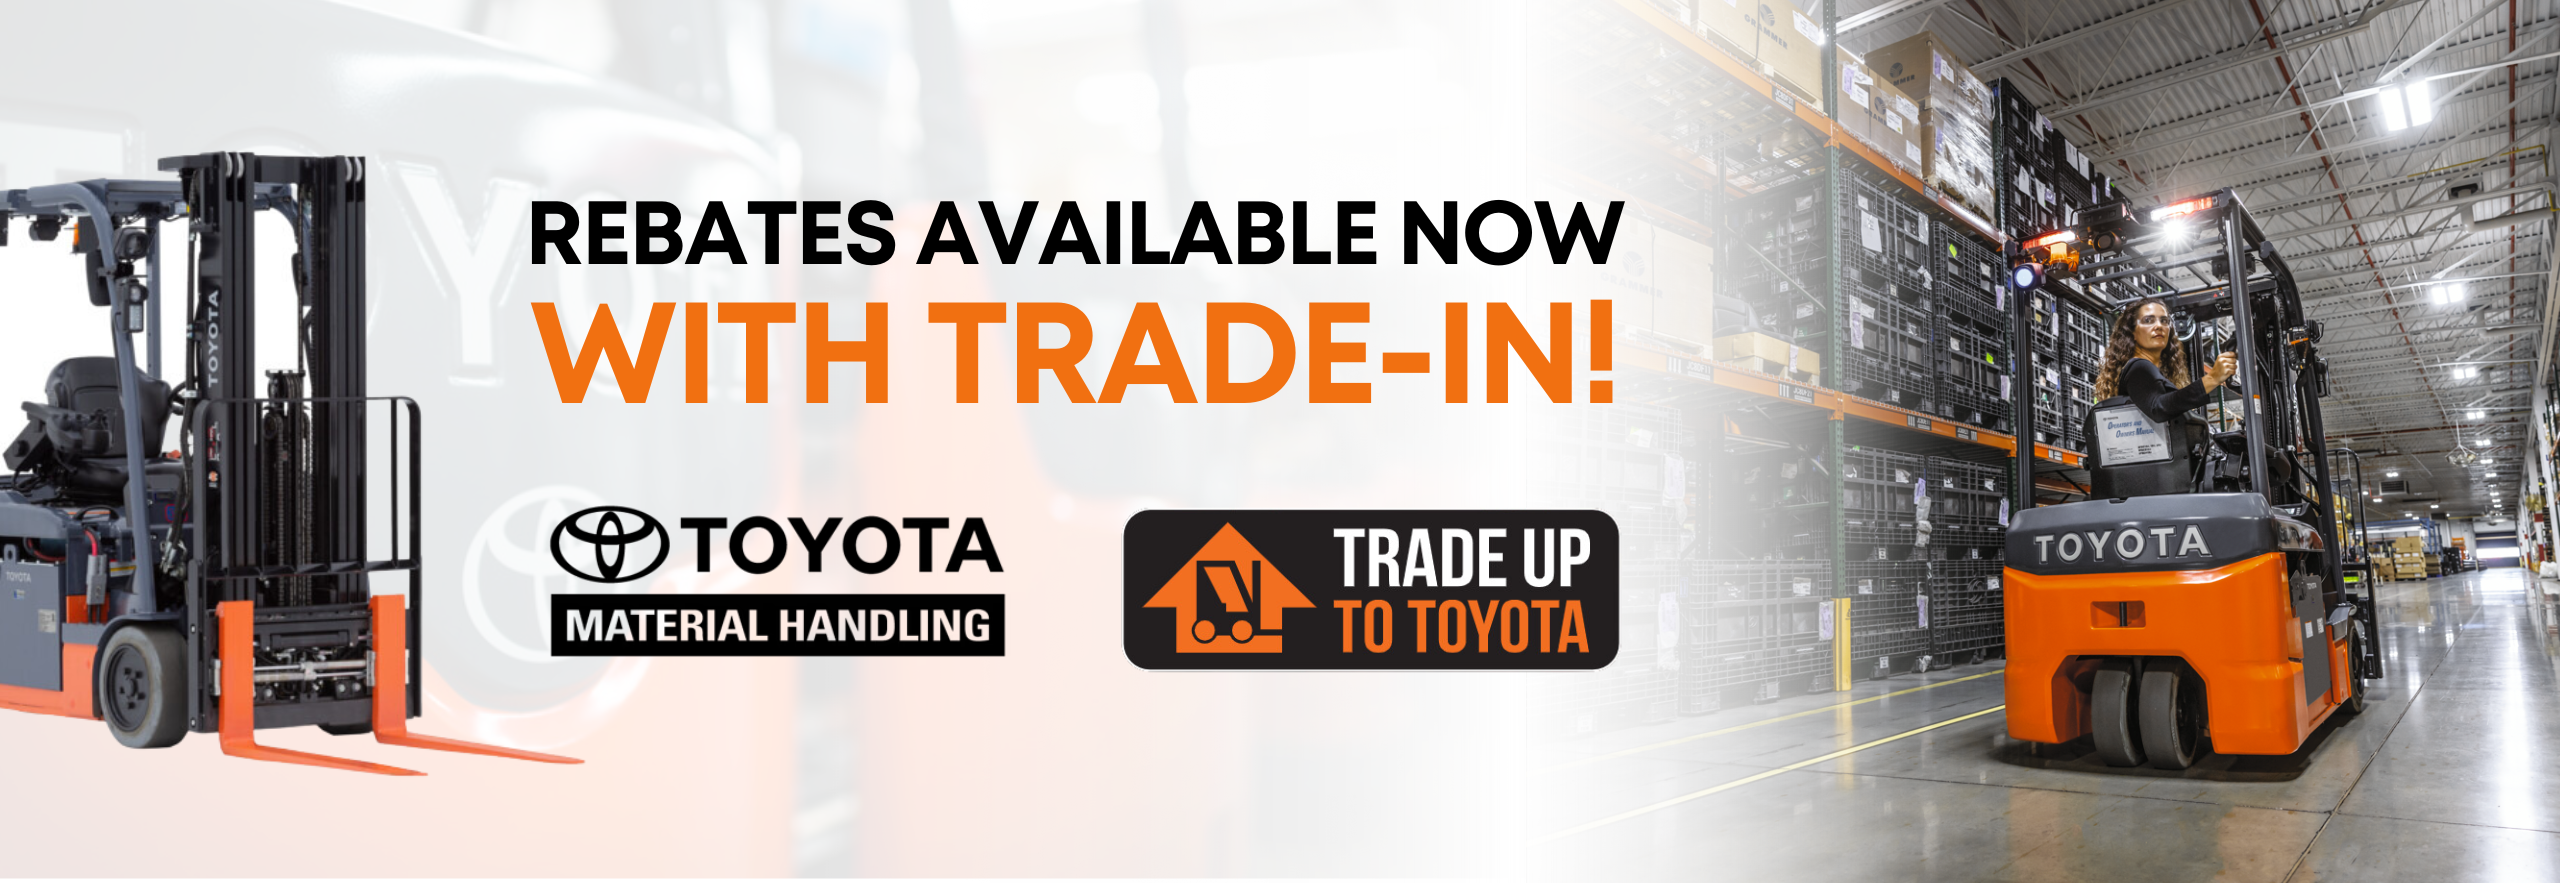 Trade Up to Toyota